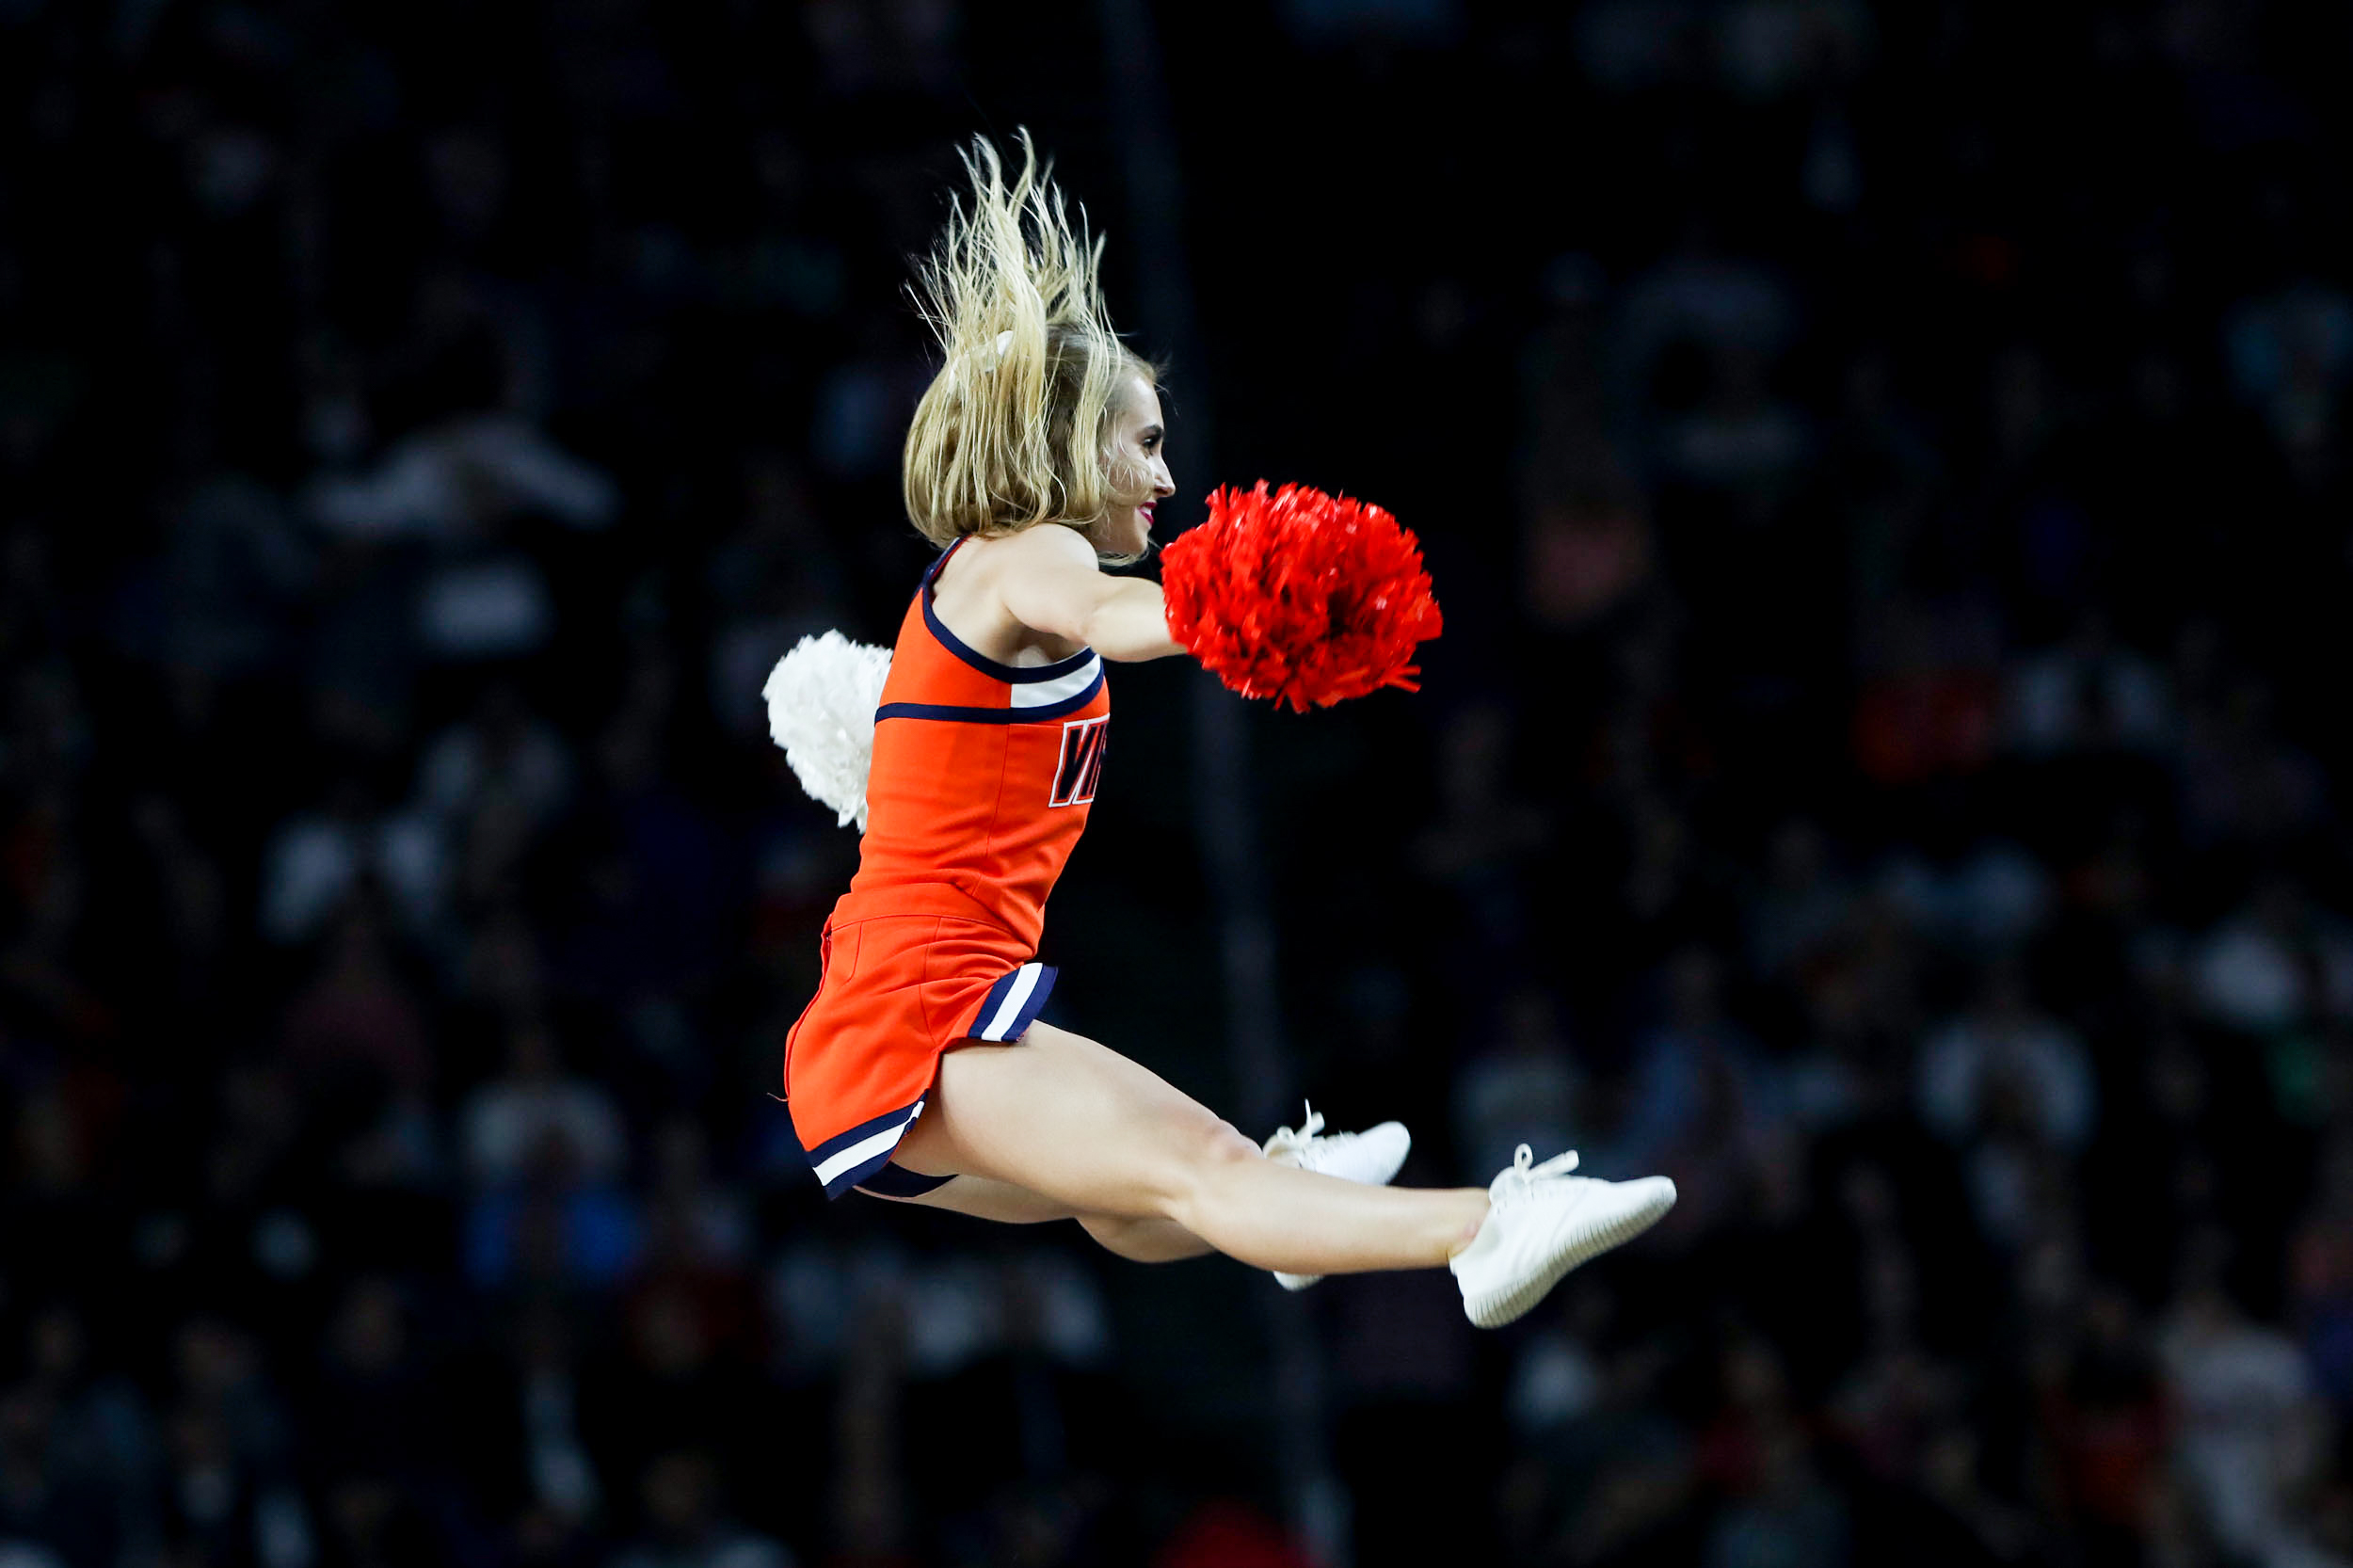 UVA cheer leader doing a straddle jump